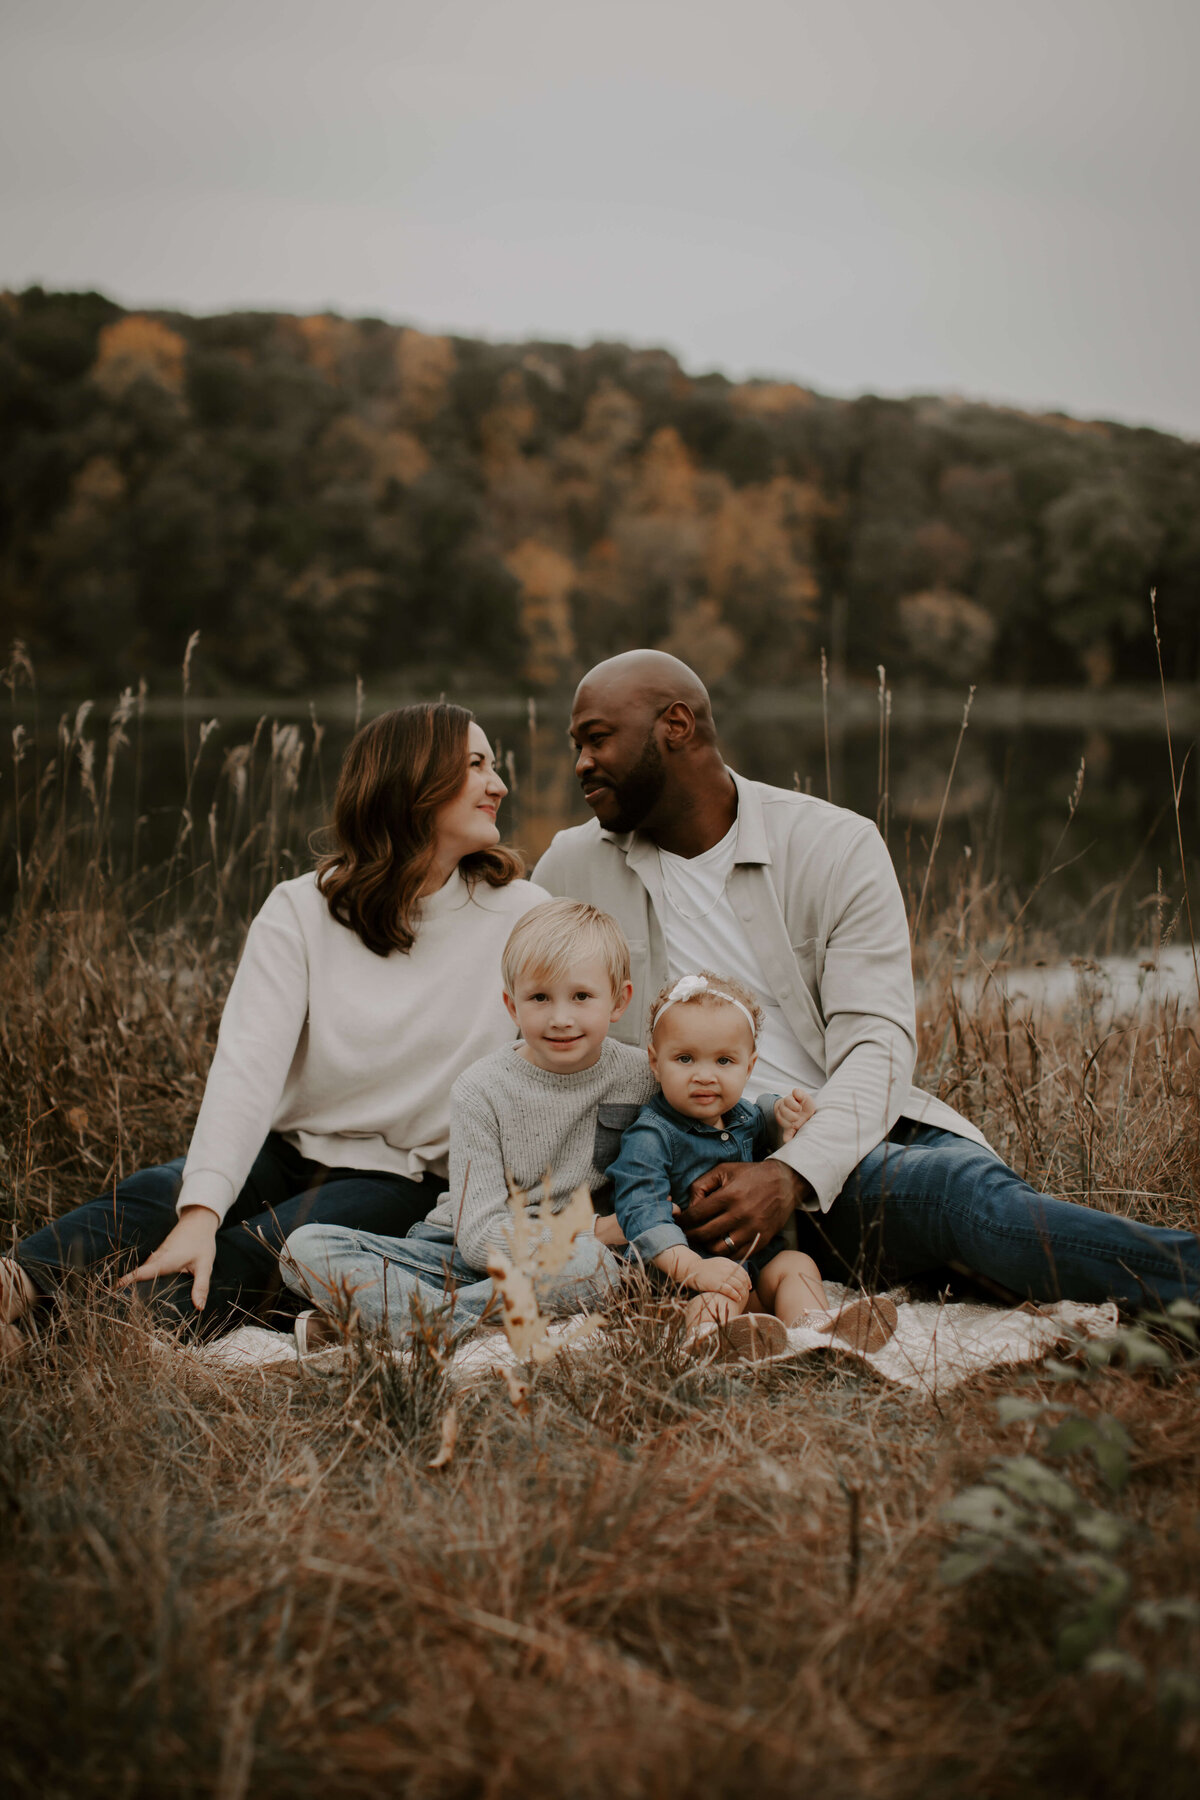 Fall-Mini-Session-Family-Photography-Woodbury-Minnesota-Sigrid-Dabelstein-Photography-BECK-9